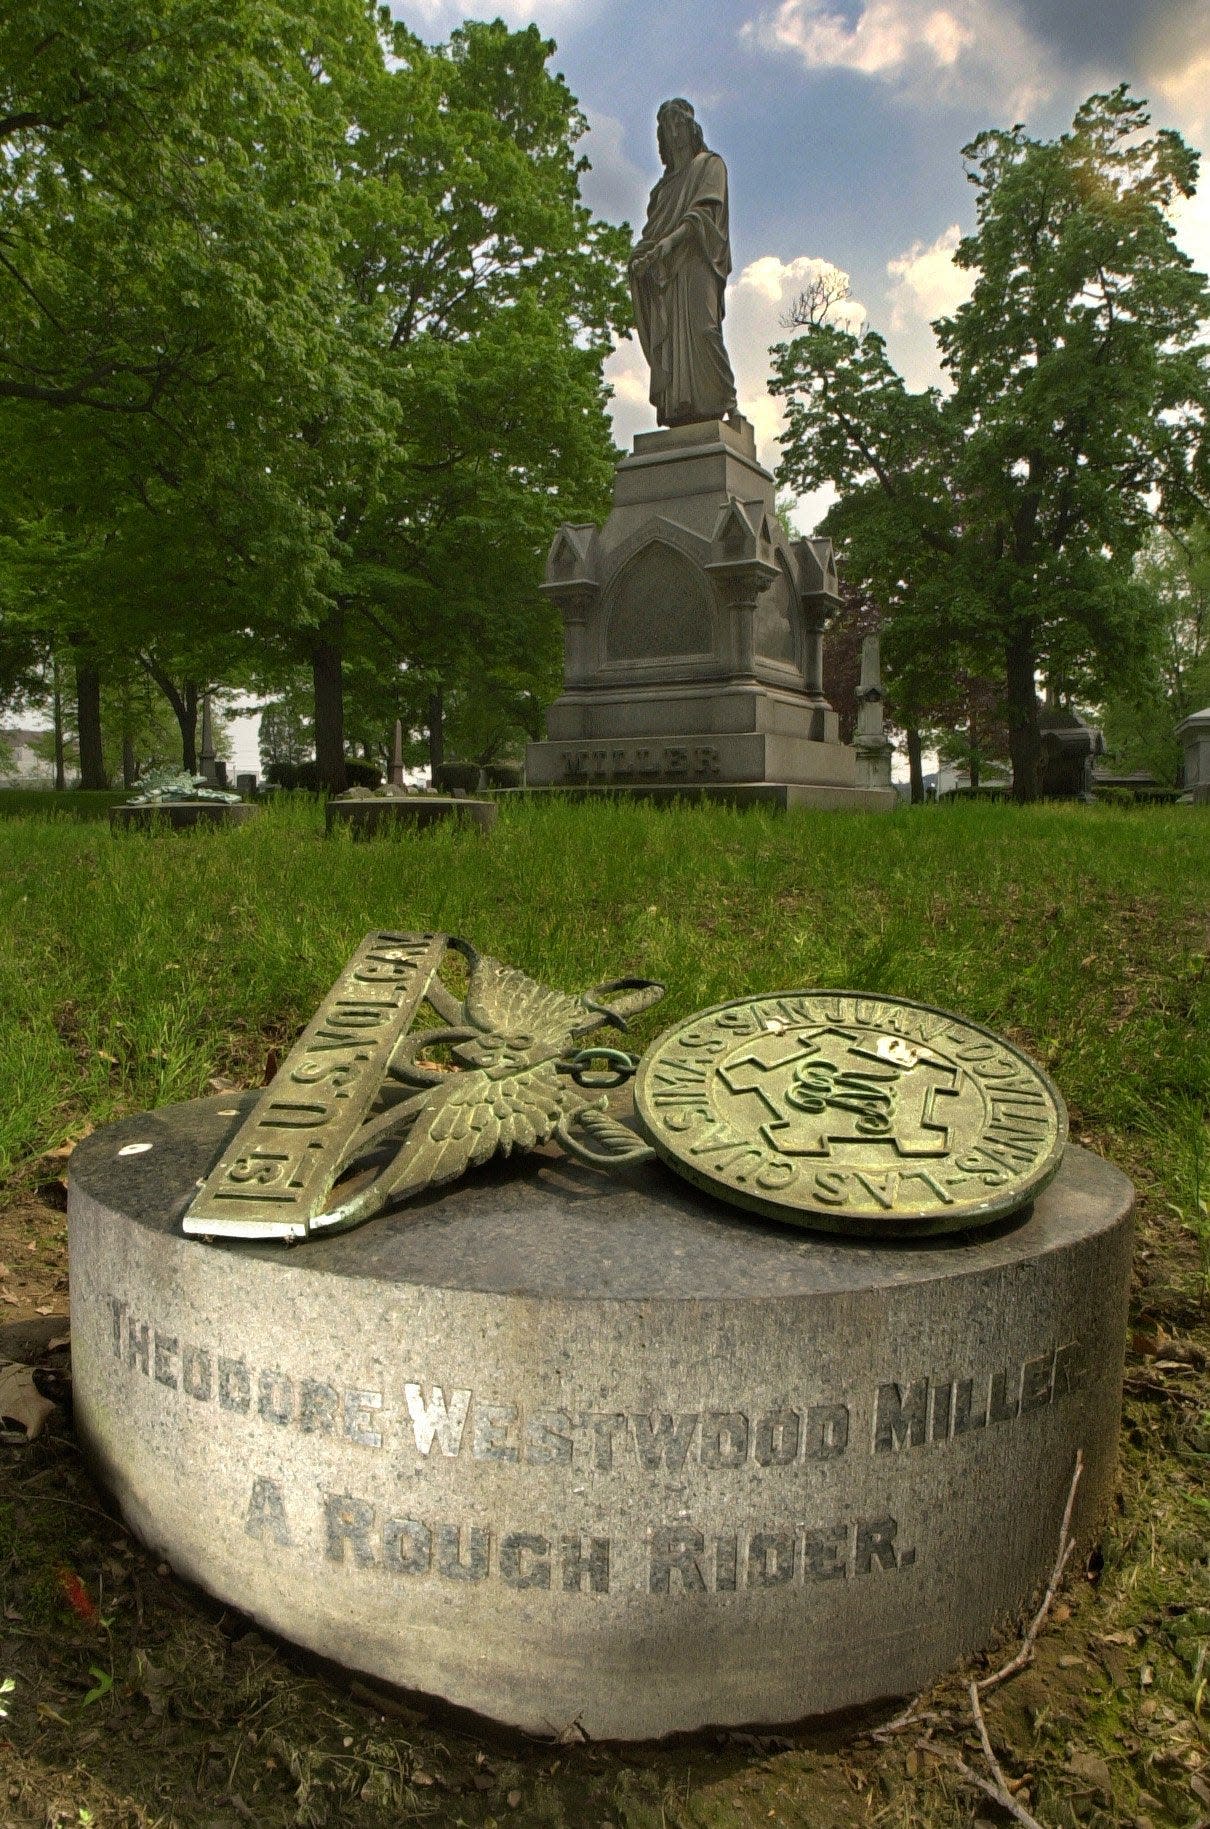 Someone has taken the bronze ornament from the Glendale Cemetery grave of Spanish-American War soldier Theodore Westwood Miller, a Rough Rider from Akron.